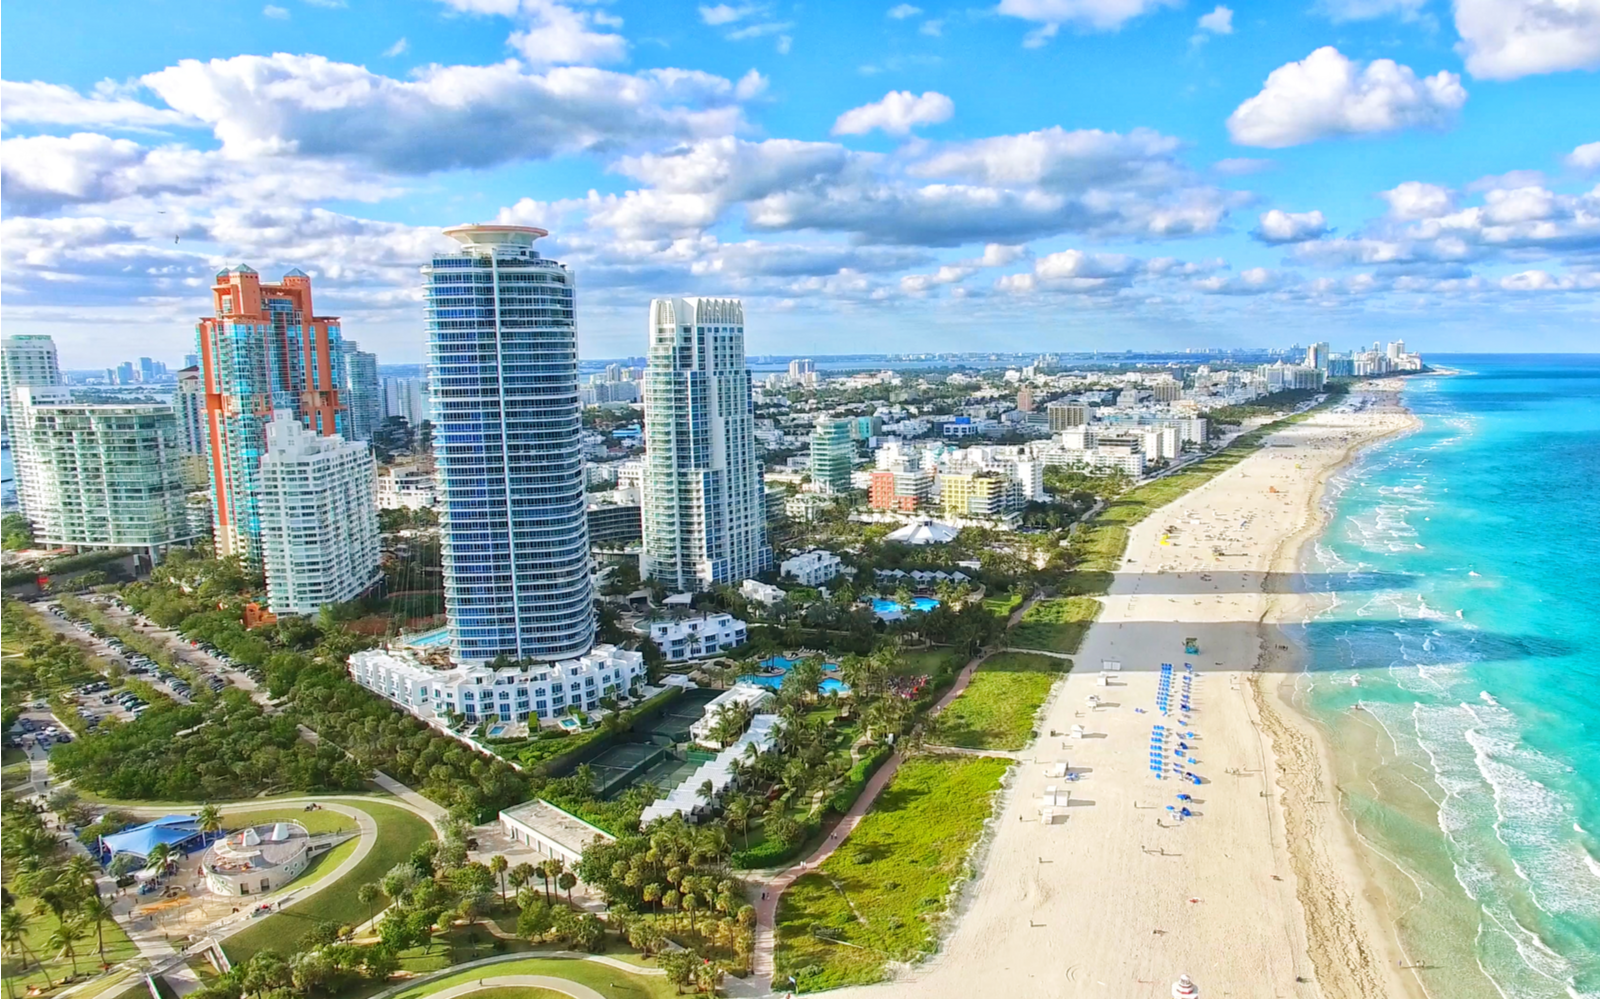 The Best Time to Visit Miami in 2022